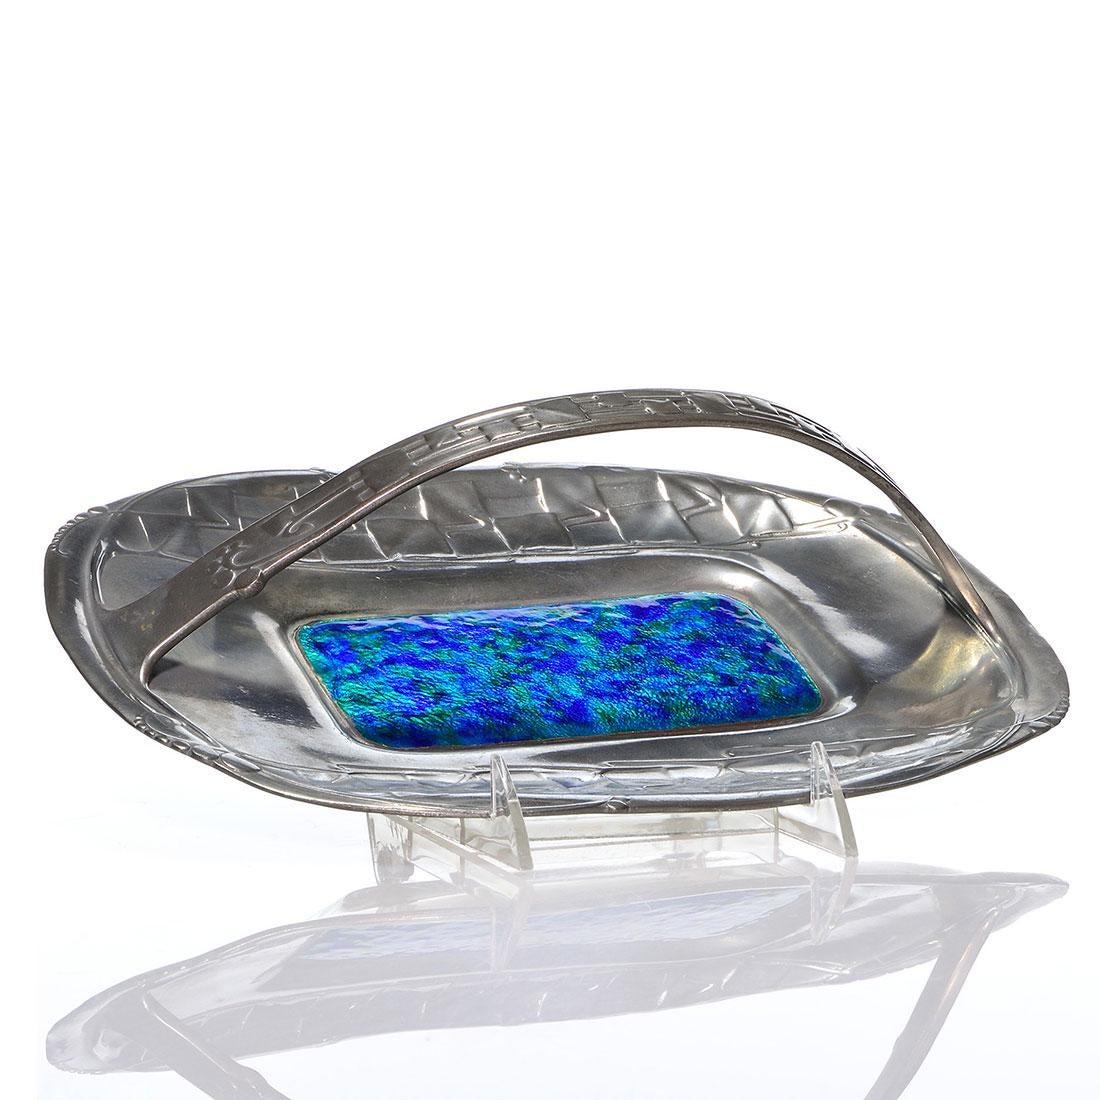 An antique English pewter tray of oval form with a loop handle and bright field of blue and green enamel by Archibald Knox (1864-1933) for Liberty & Co. of London, circa 1902-1905. Knox is best known for his Tudric pewter and Cymric silver designs